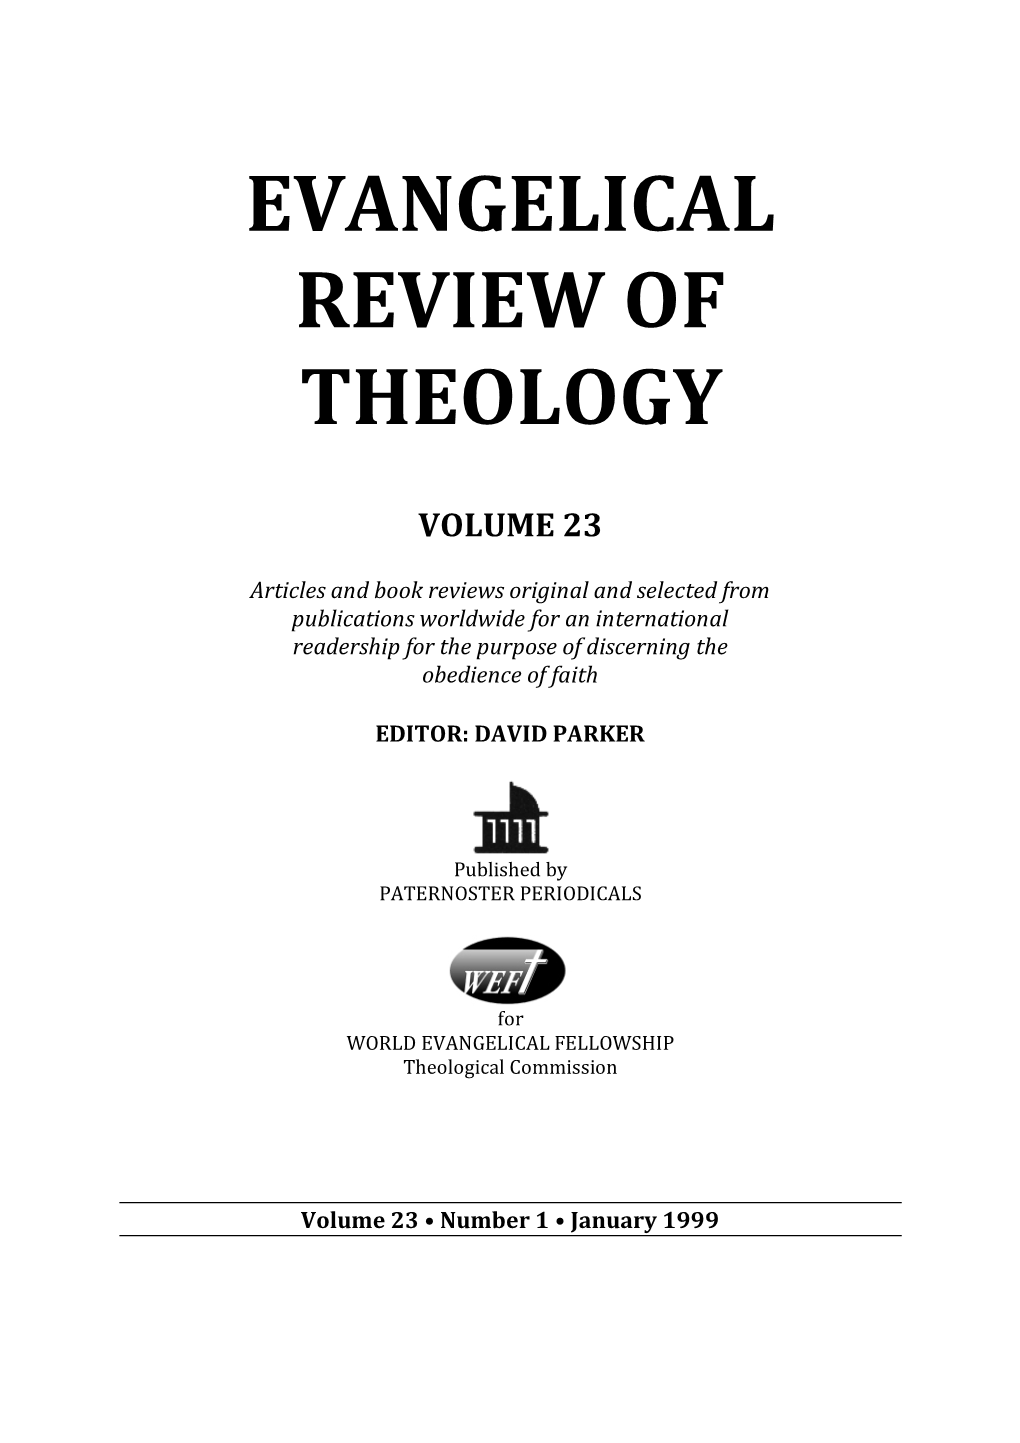 Evangelical Review of Theology Reflect the Opinions of the Authors and Reviewers and Do Not Necessarily Represent Those of the Editor Or Publisher